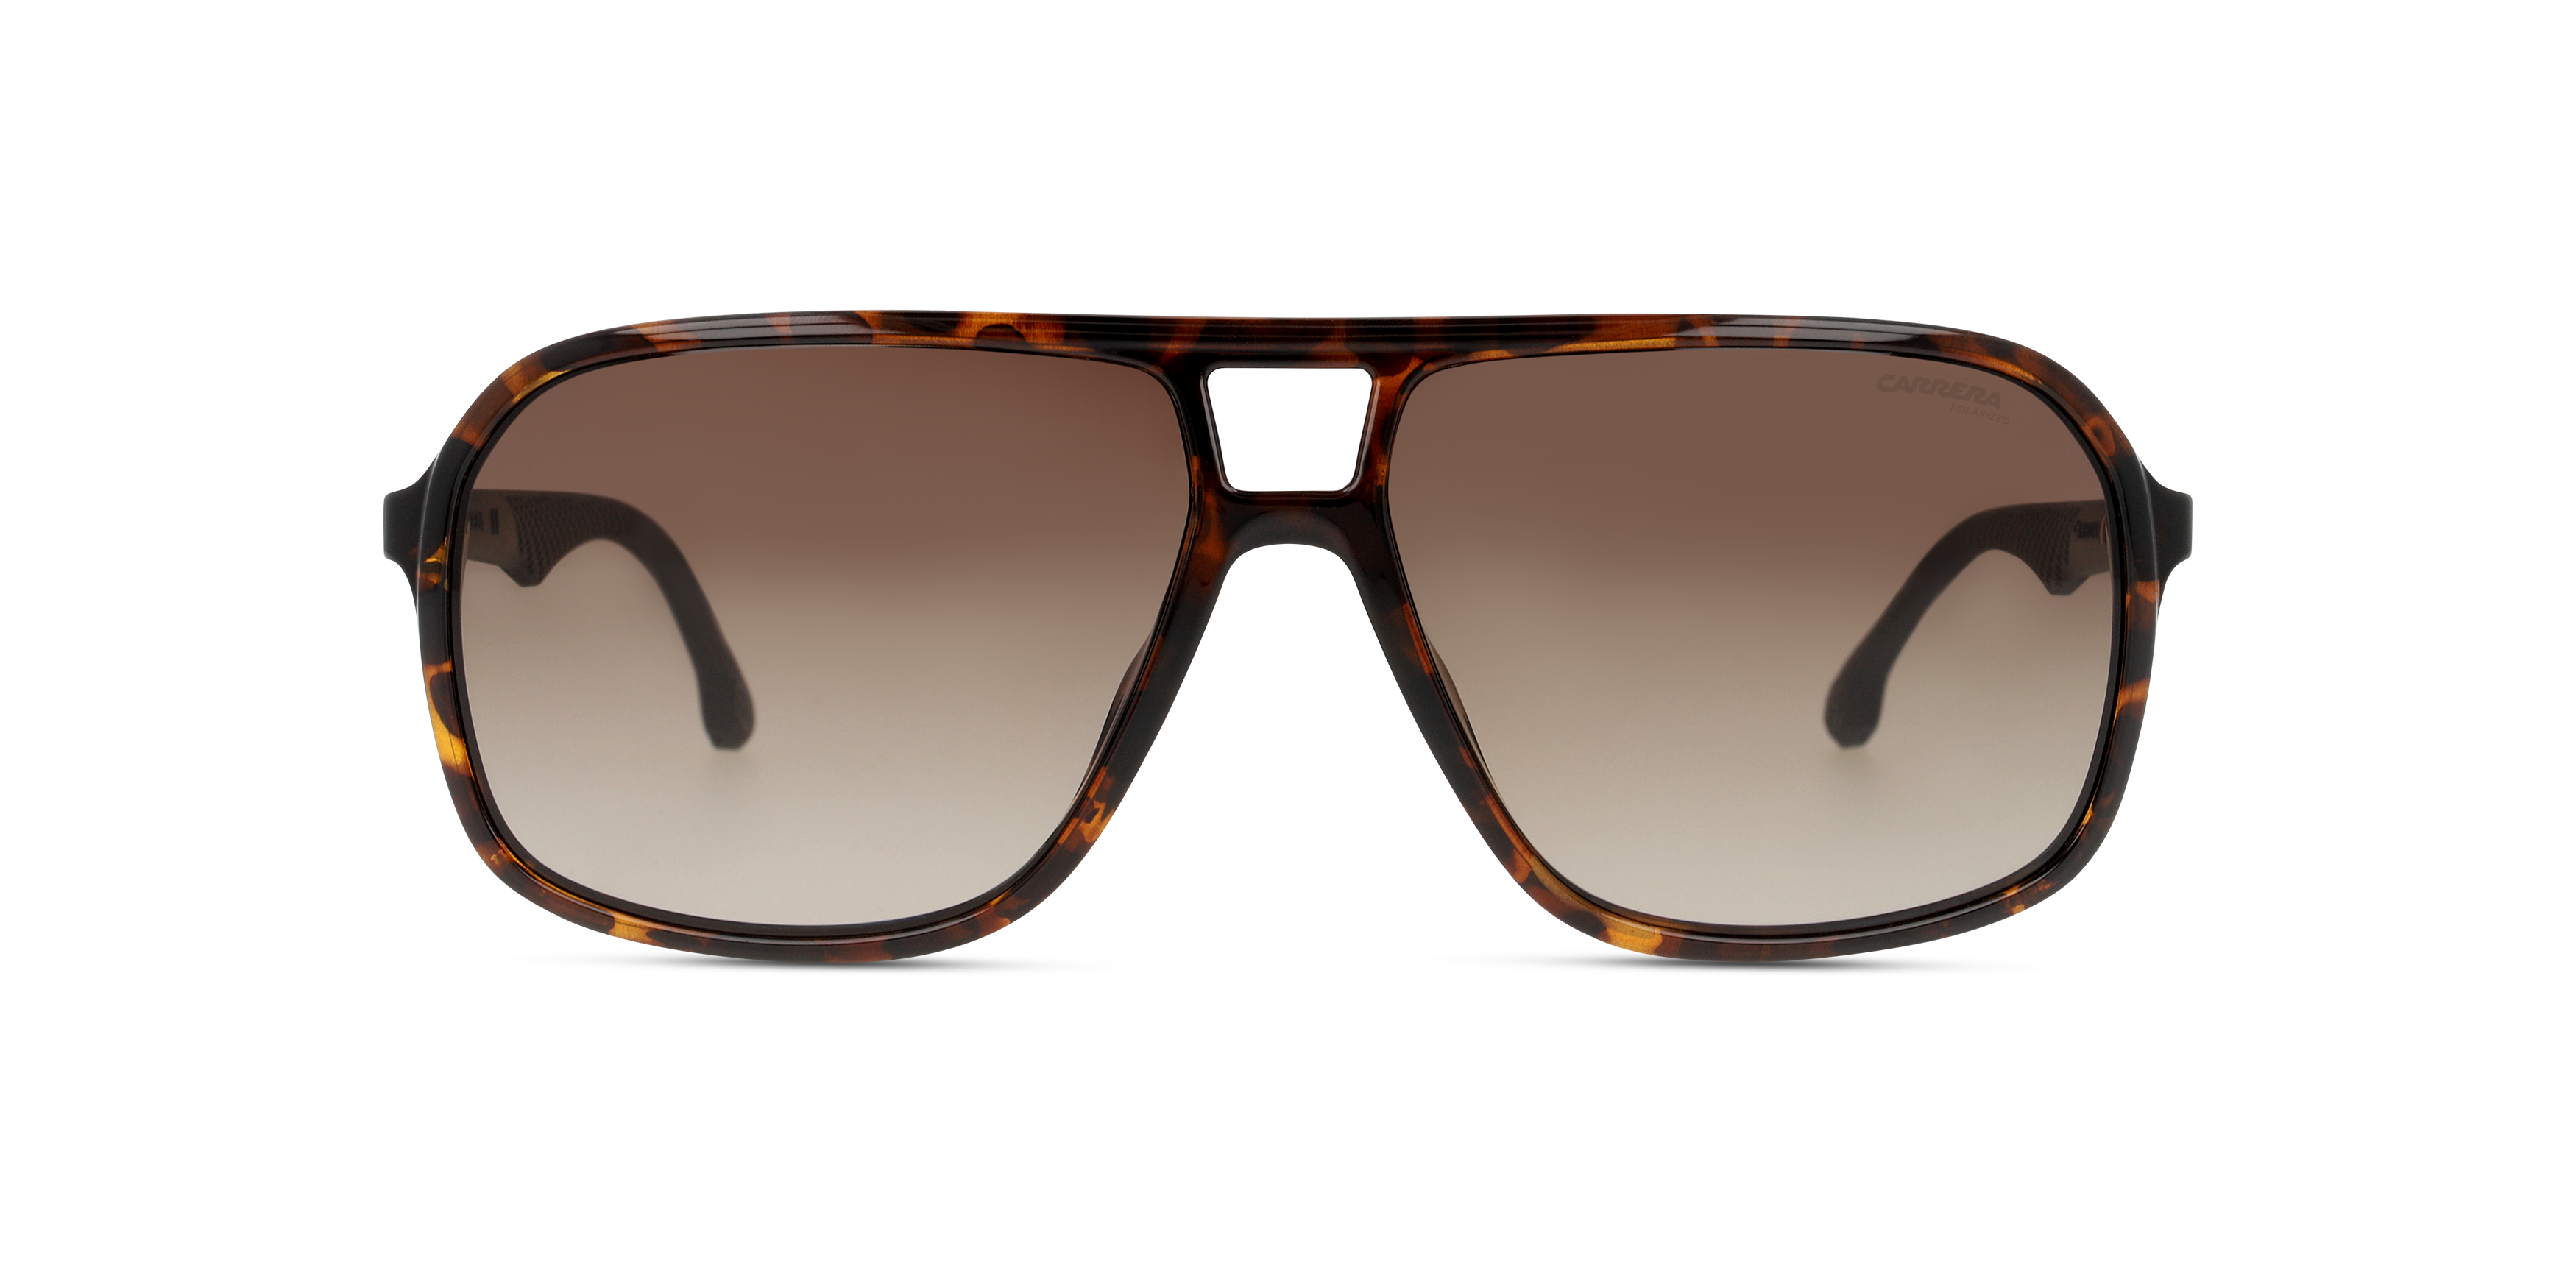 [products.image.front] Carrera 8035/S 86